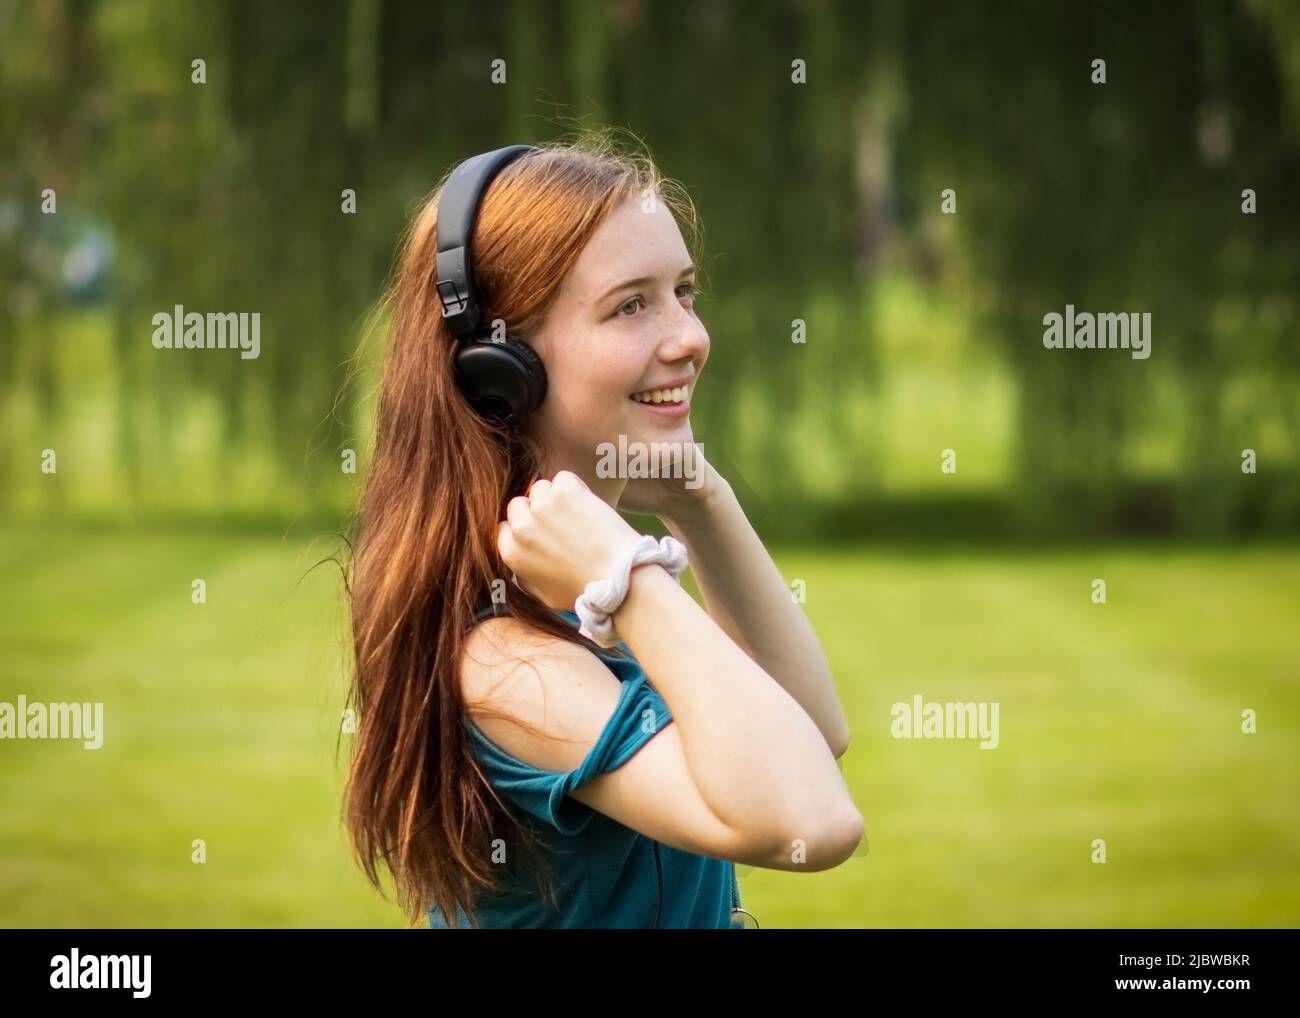 Teenage girl with long red hair smiling and wearing headphones in a green field with a willow tree and green lawn in the background during the summer Stock Photo